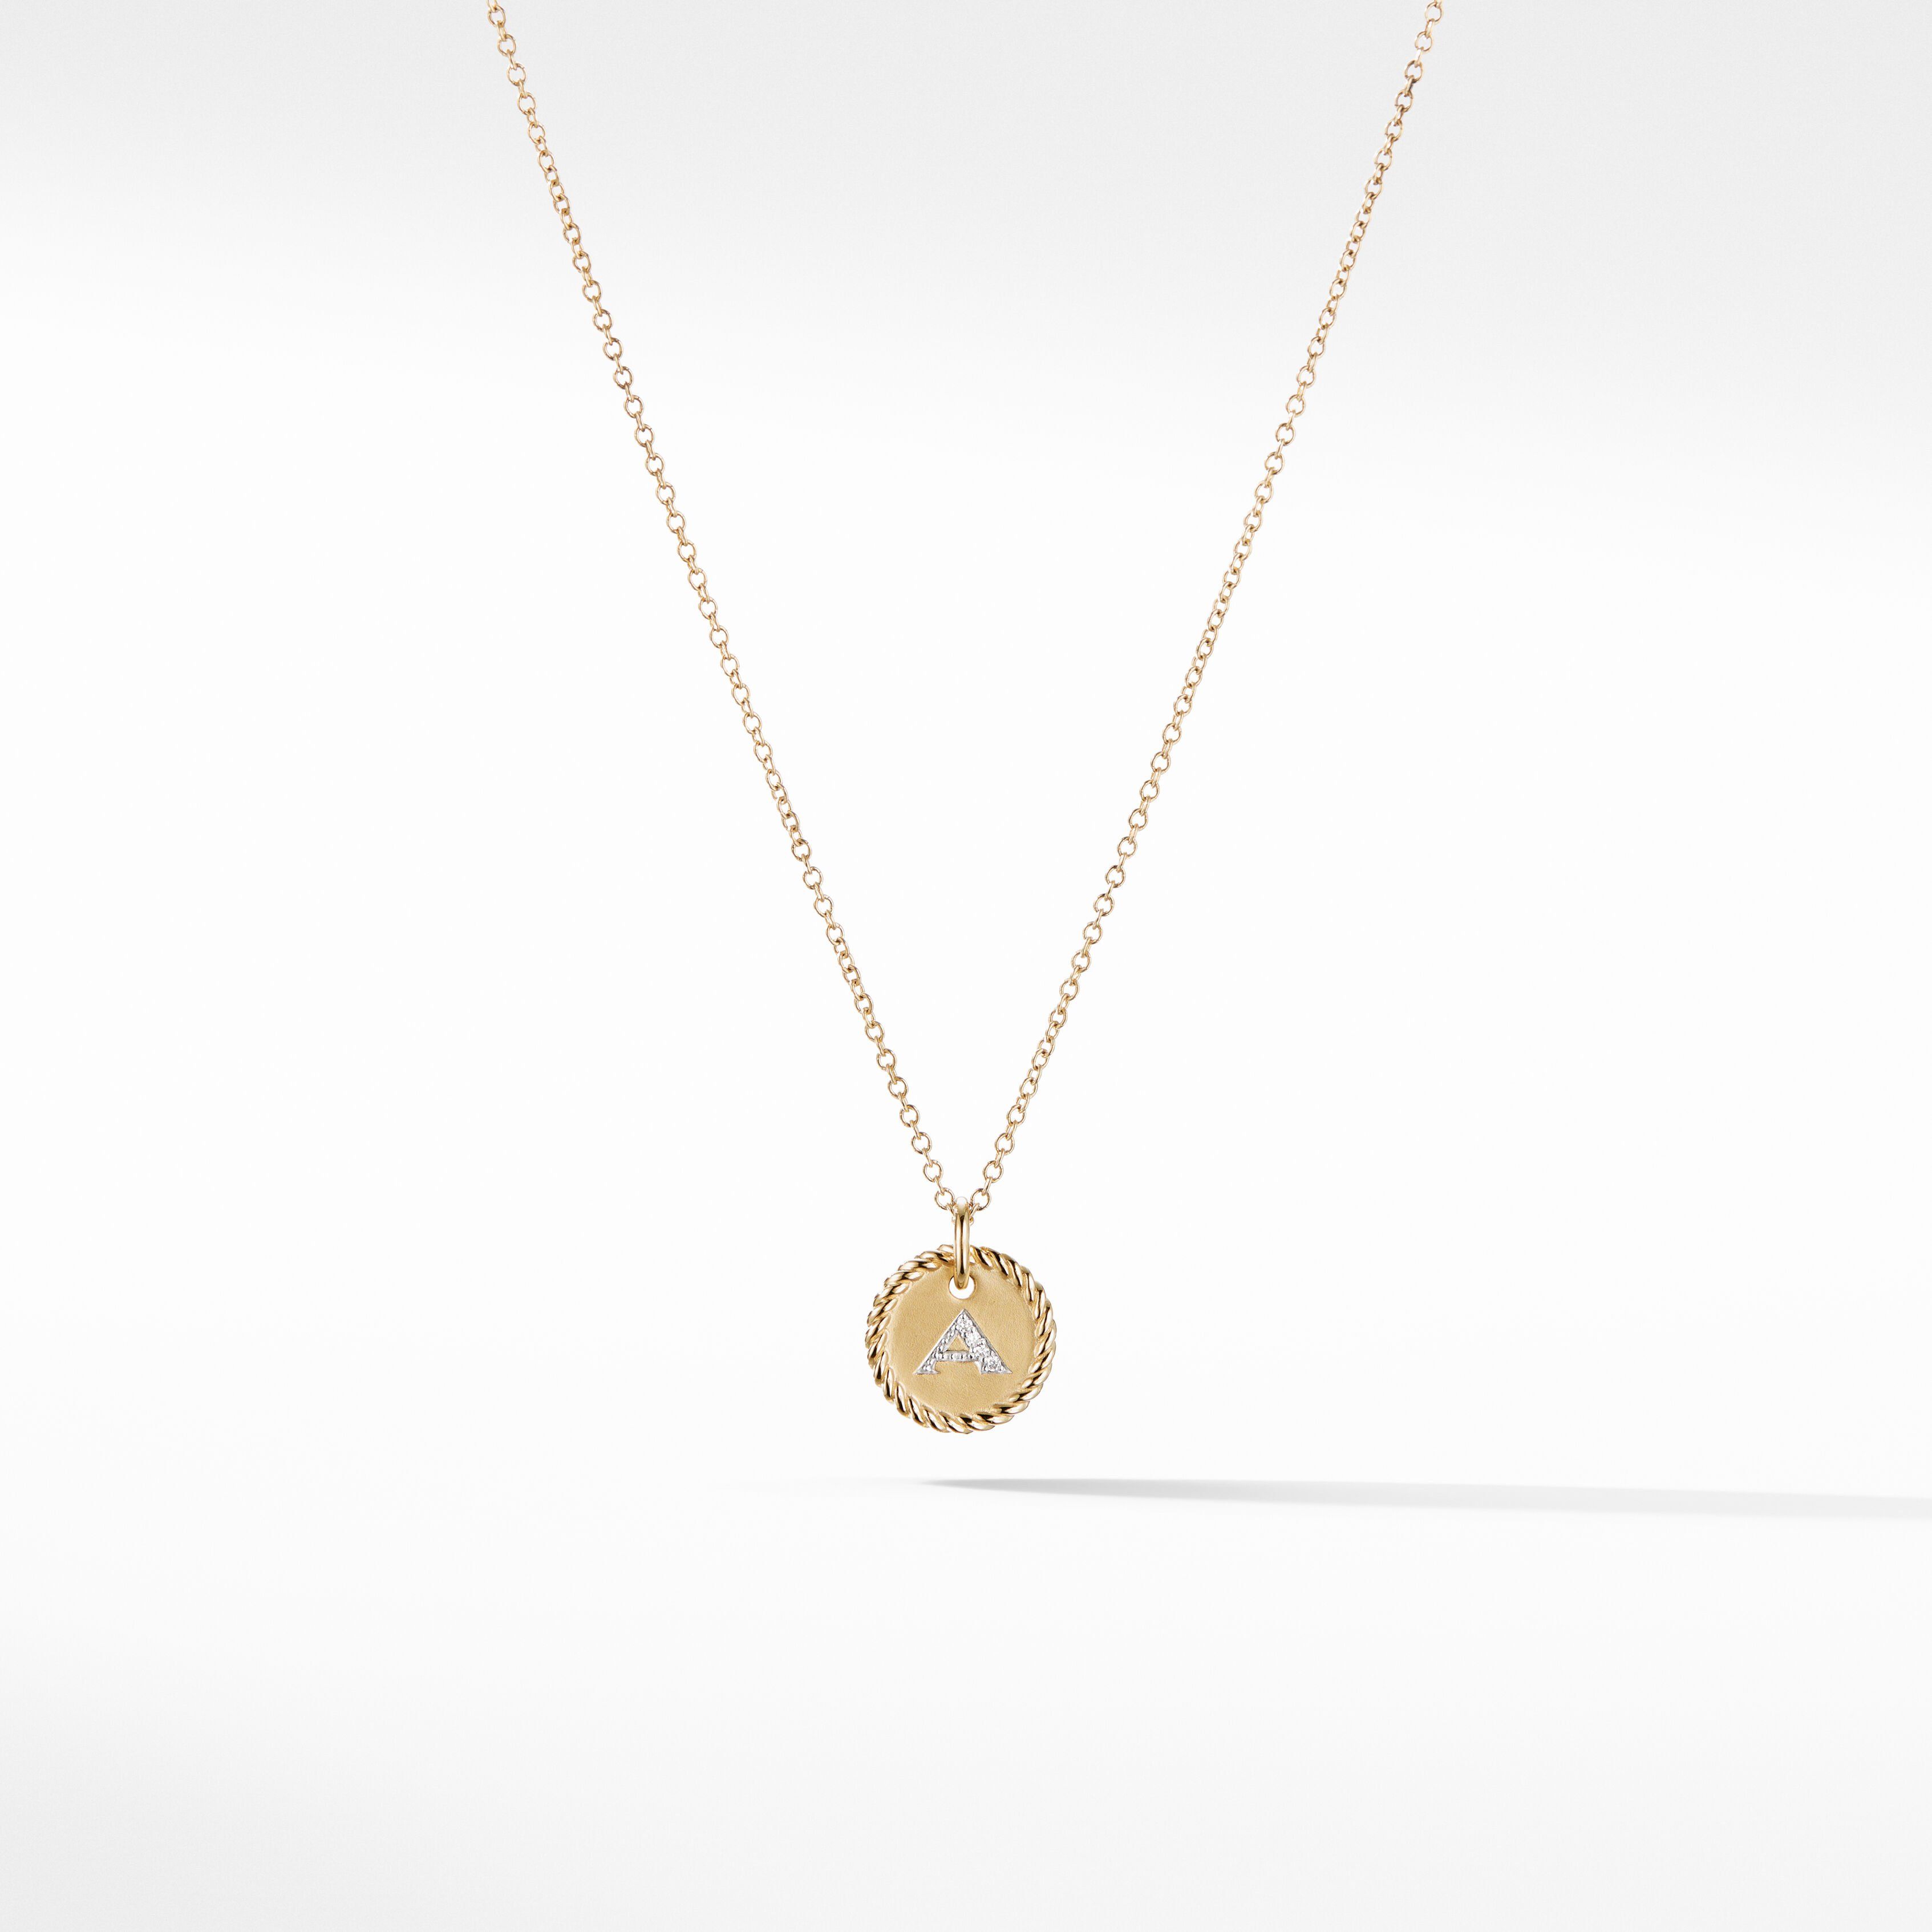 A Initial Charm Necklace in 18K Yellow Gold with Pavé Diamonds | David Yurman